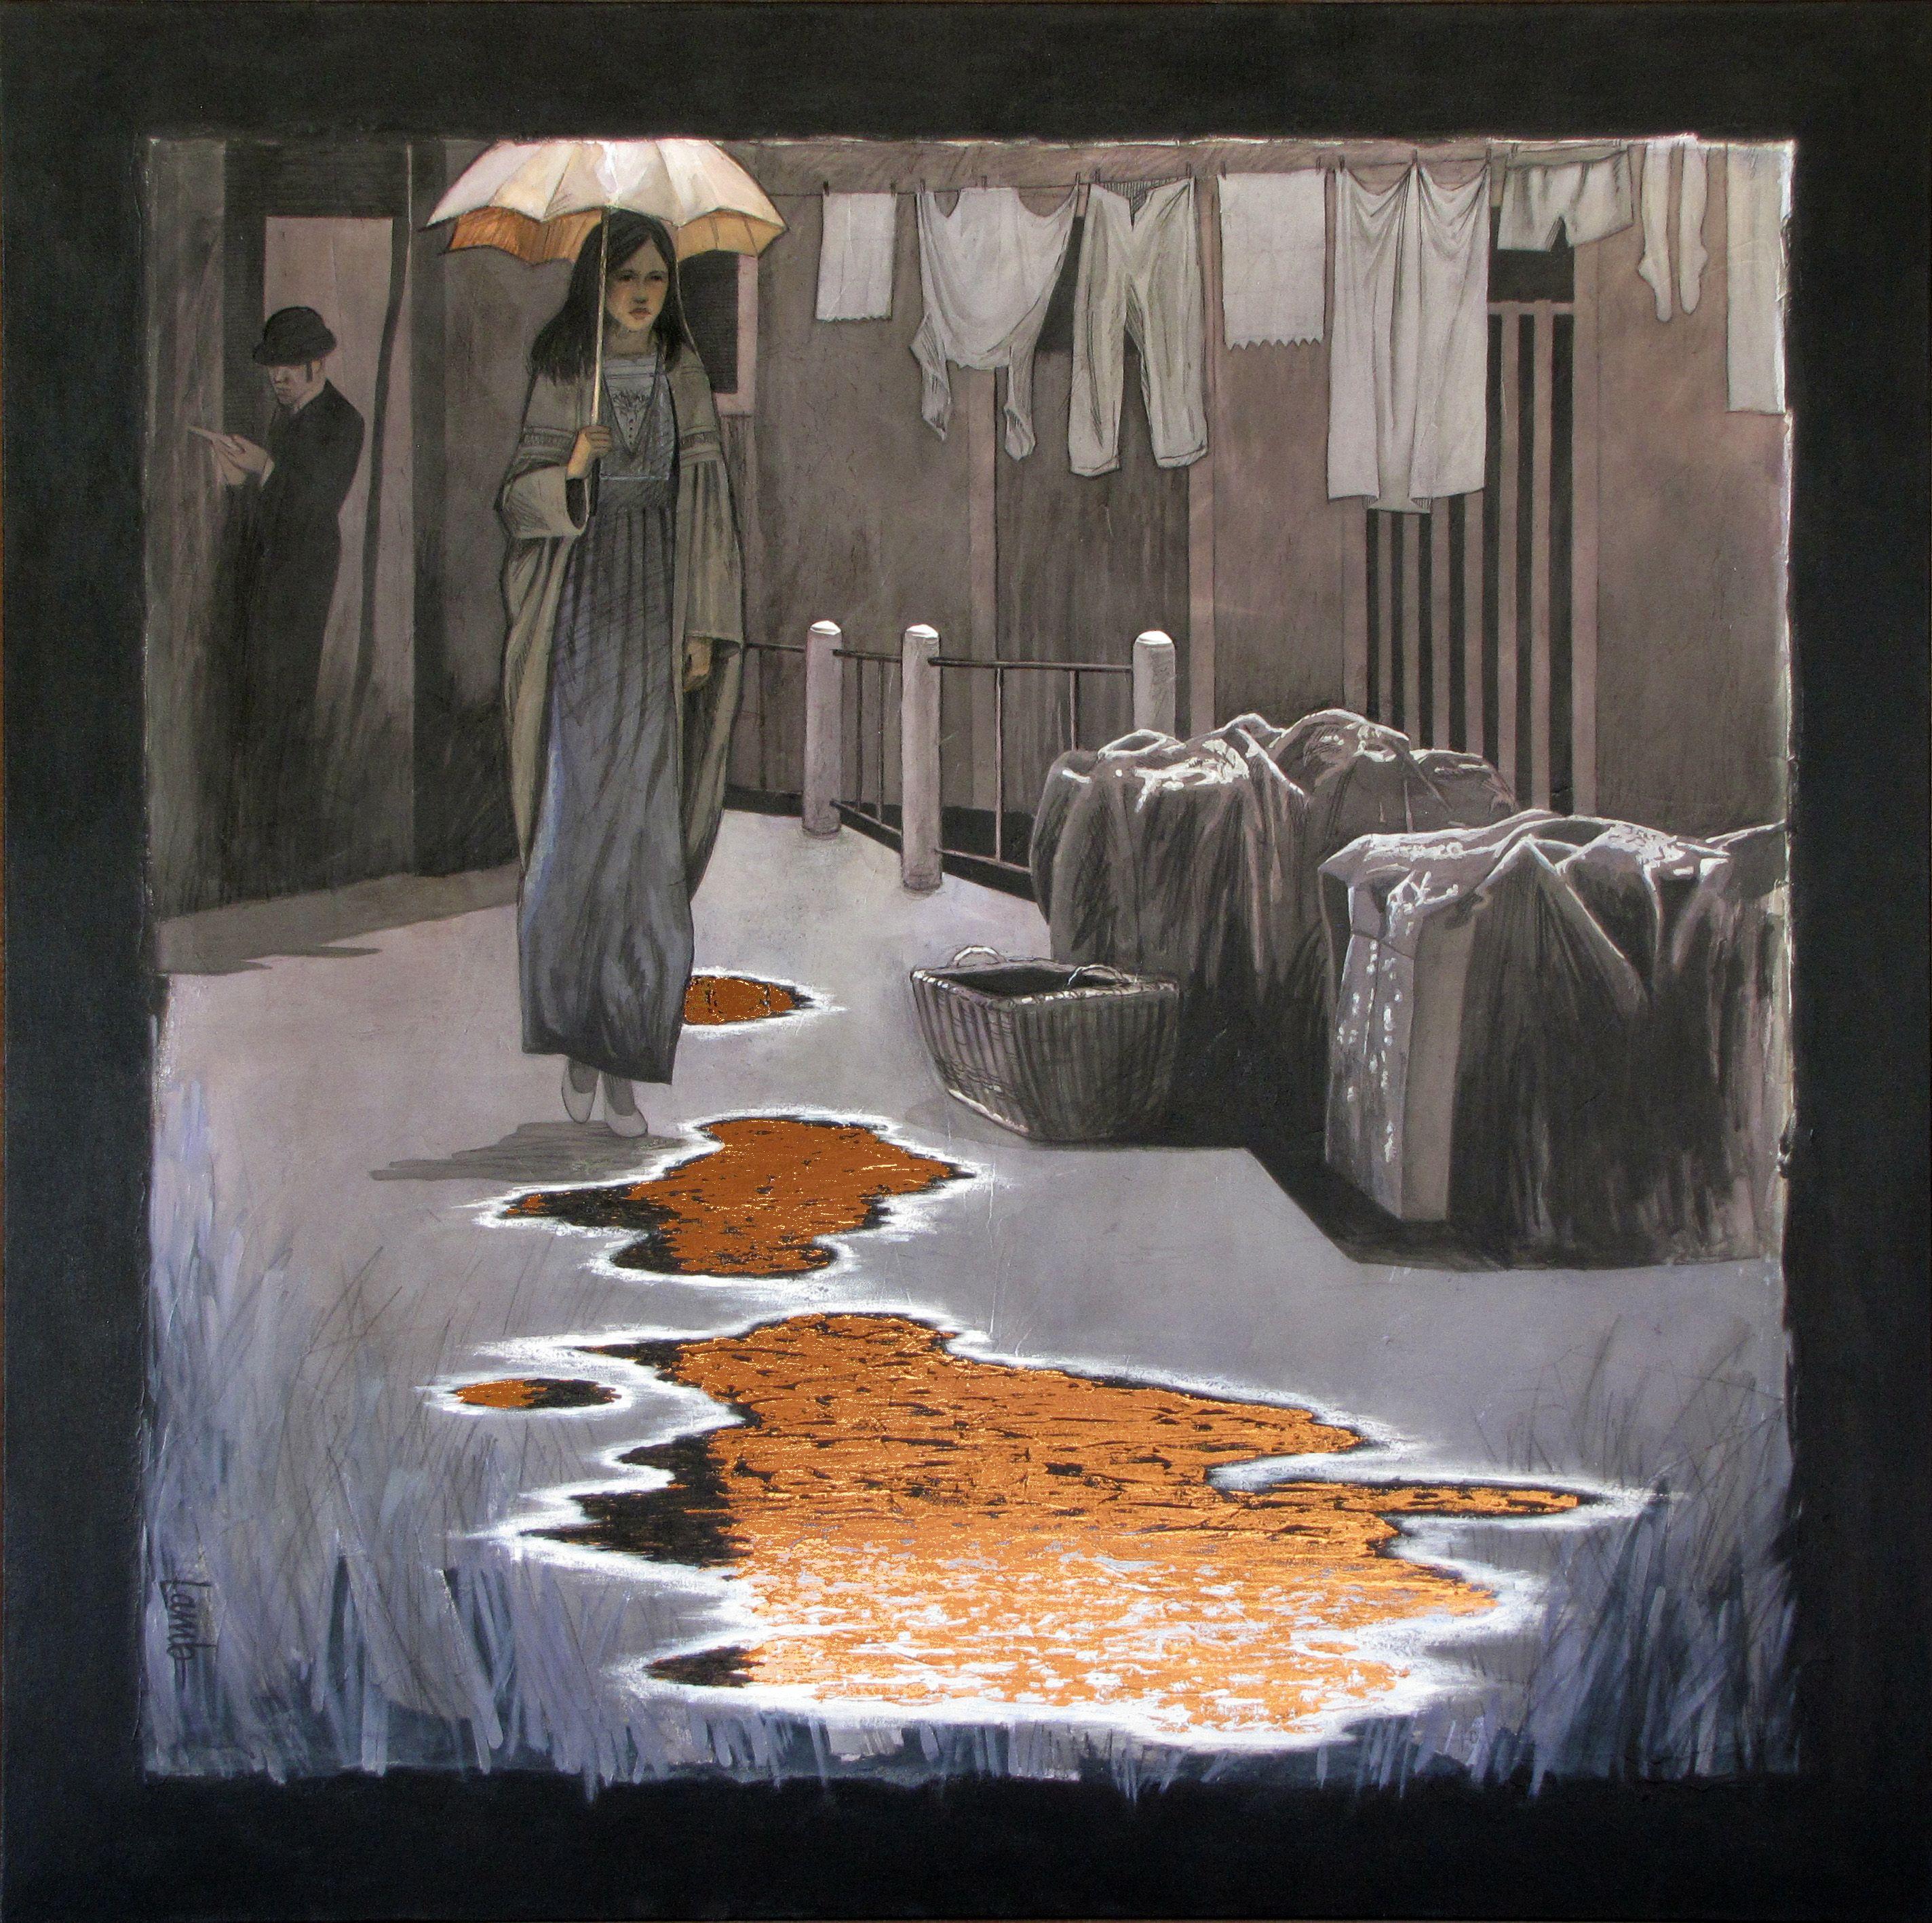 I let the painting take me where it would on this one. The photo that inspired it was somewhat romantic and melancholy. I added the puddles, struggling with their imagery. I used to think that the copper in the puddles was a reflection from the sky,